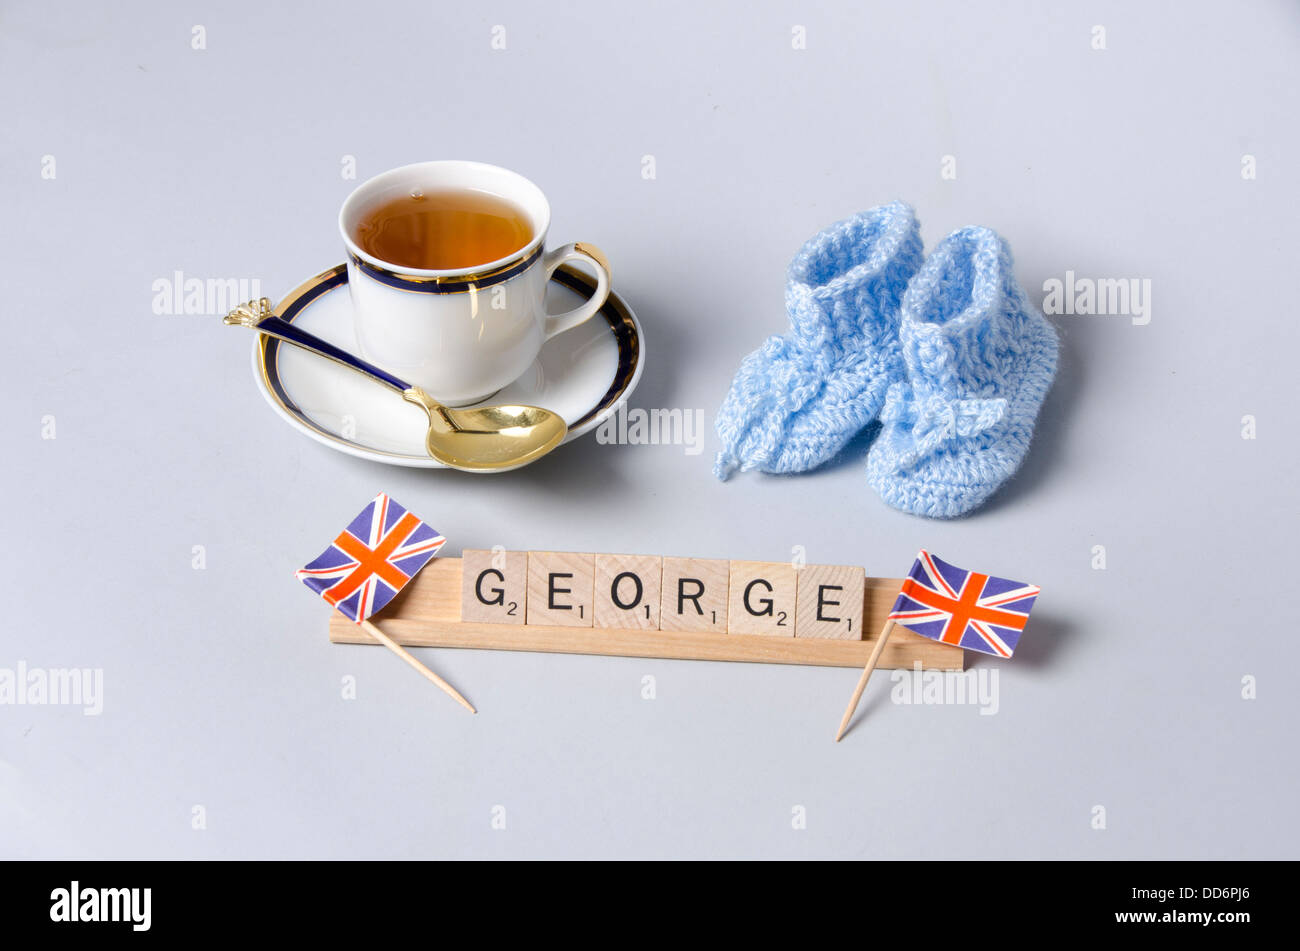 The Royal Baby Prince George Alexander Louis of Cambridge Stock Photo